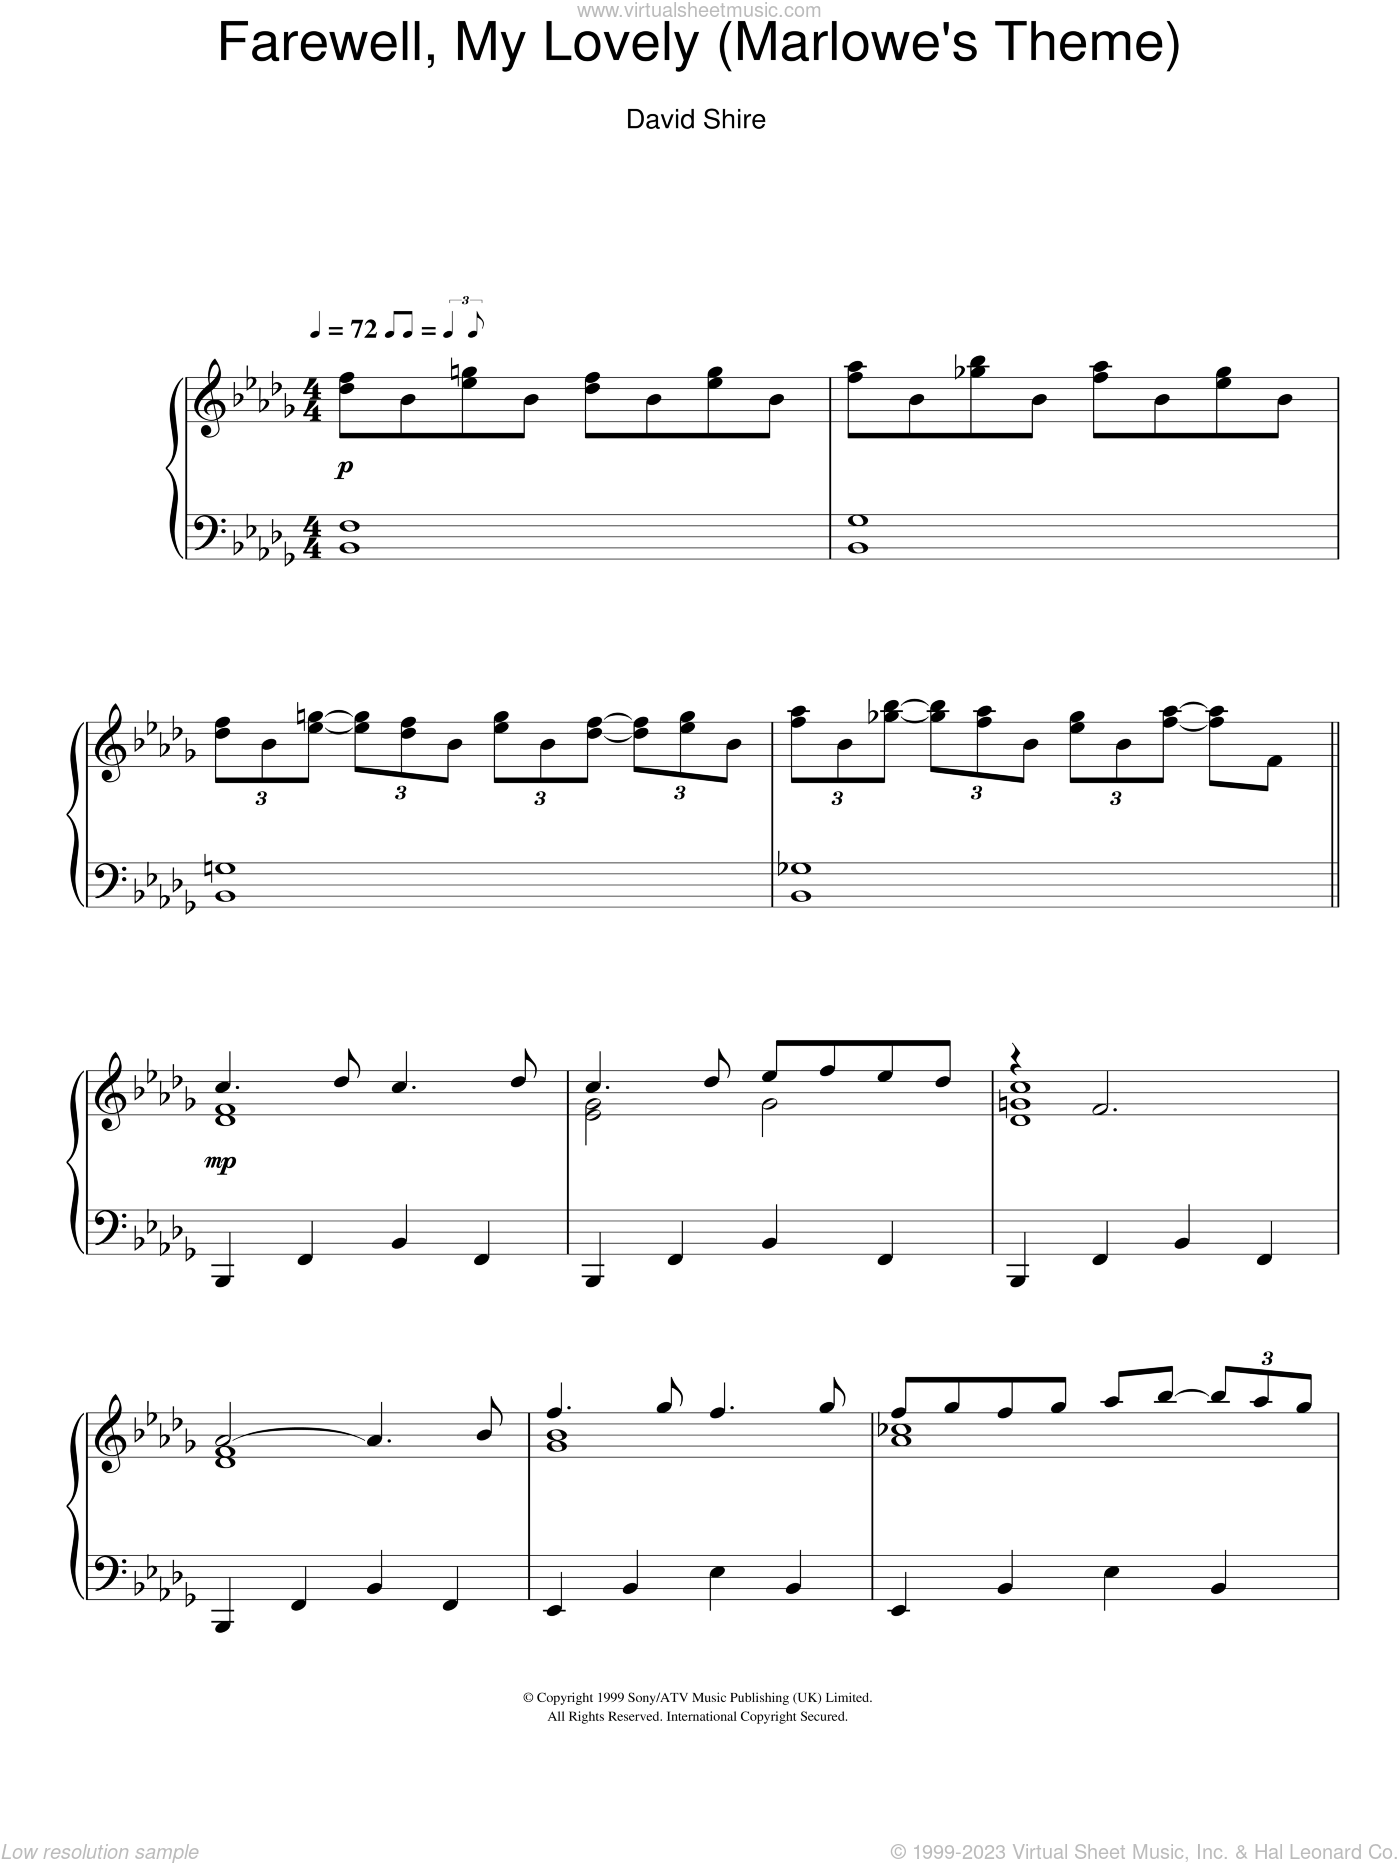 Farewell, My Lovely (Marlowe's Theme) sheet music for piano solo